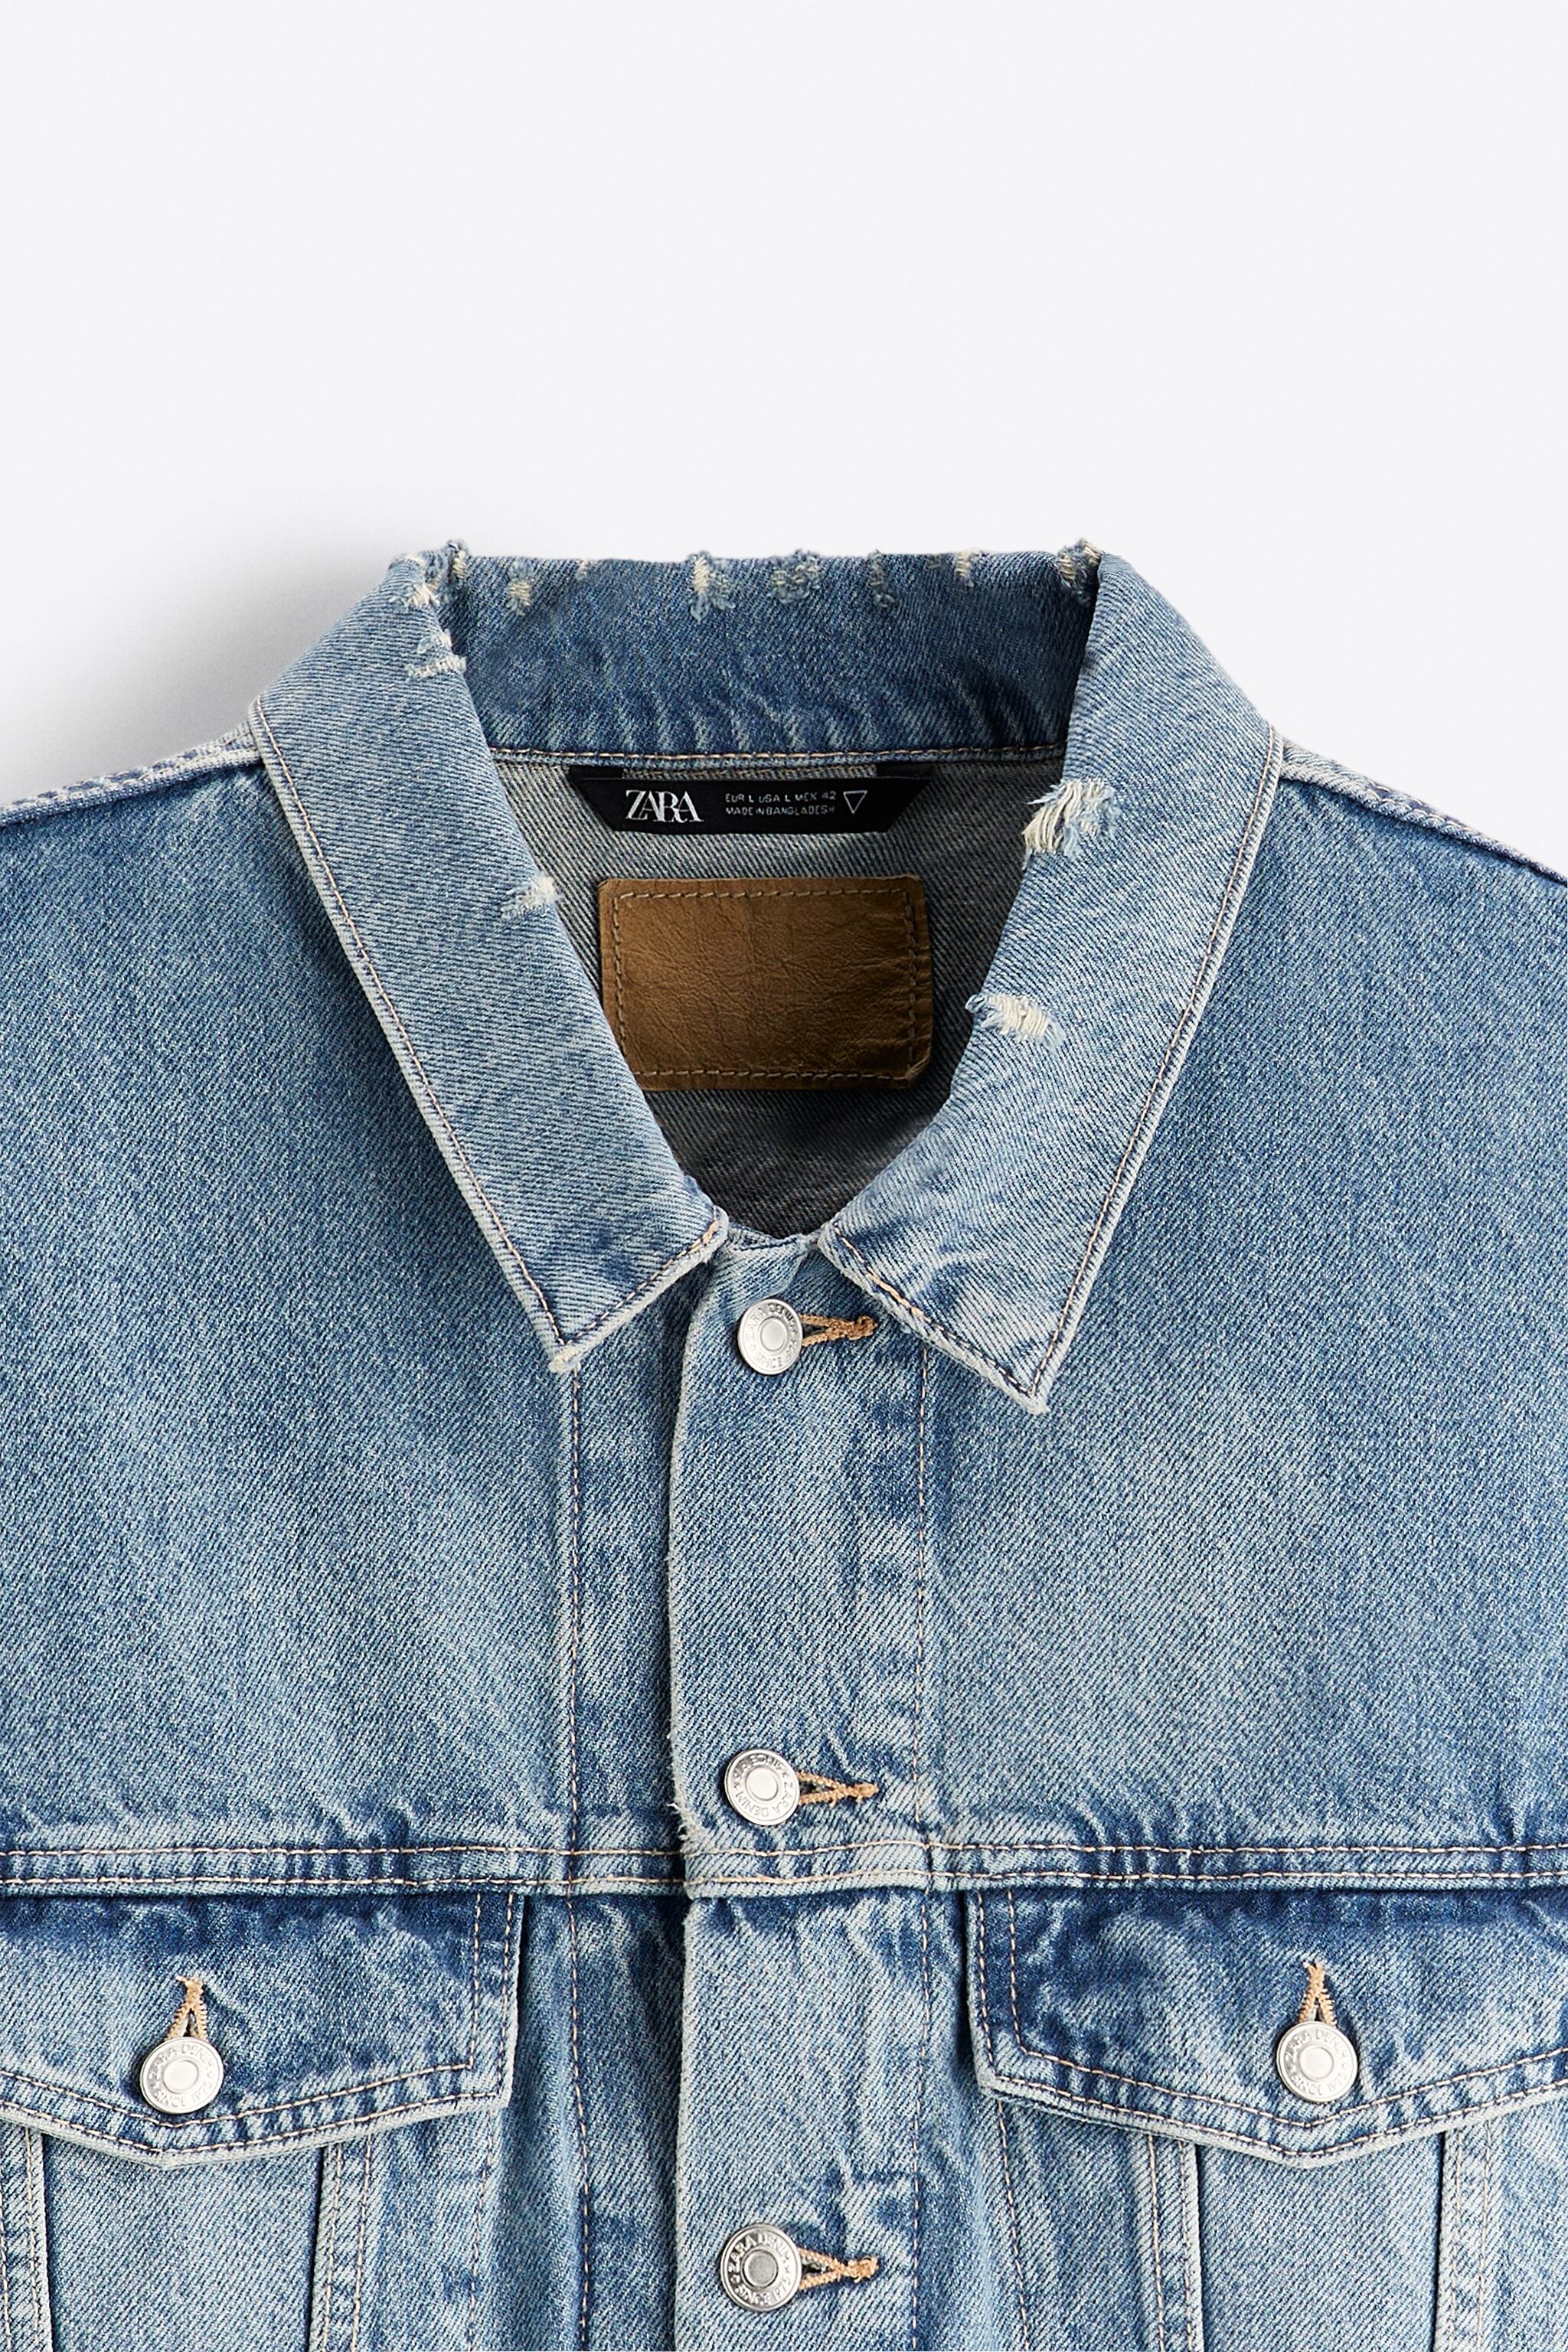 Zara RELAXED CROPPED DENIM JACKET | Square One